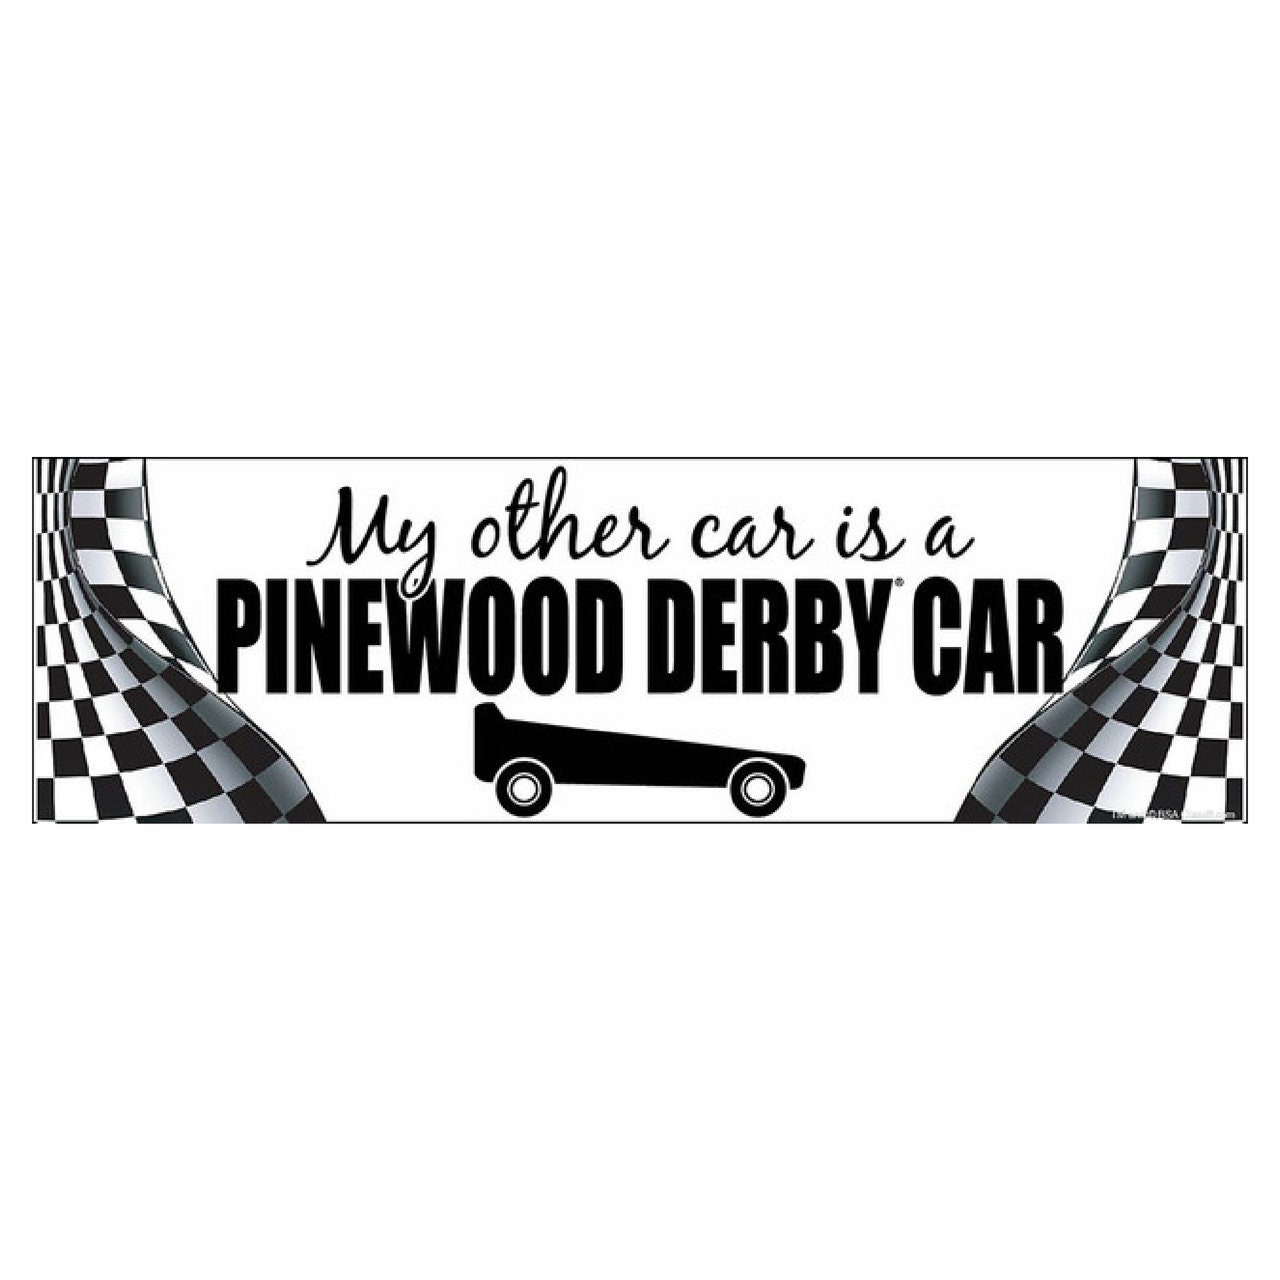 Pinewood derby car decals just for Girls.